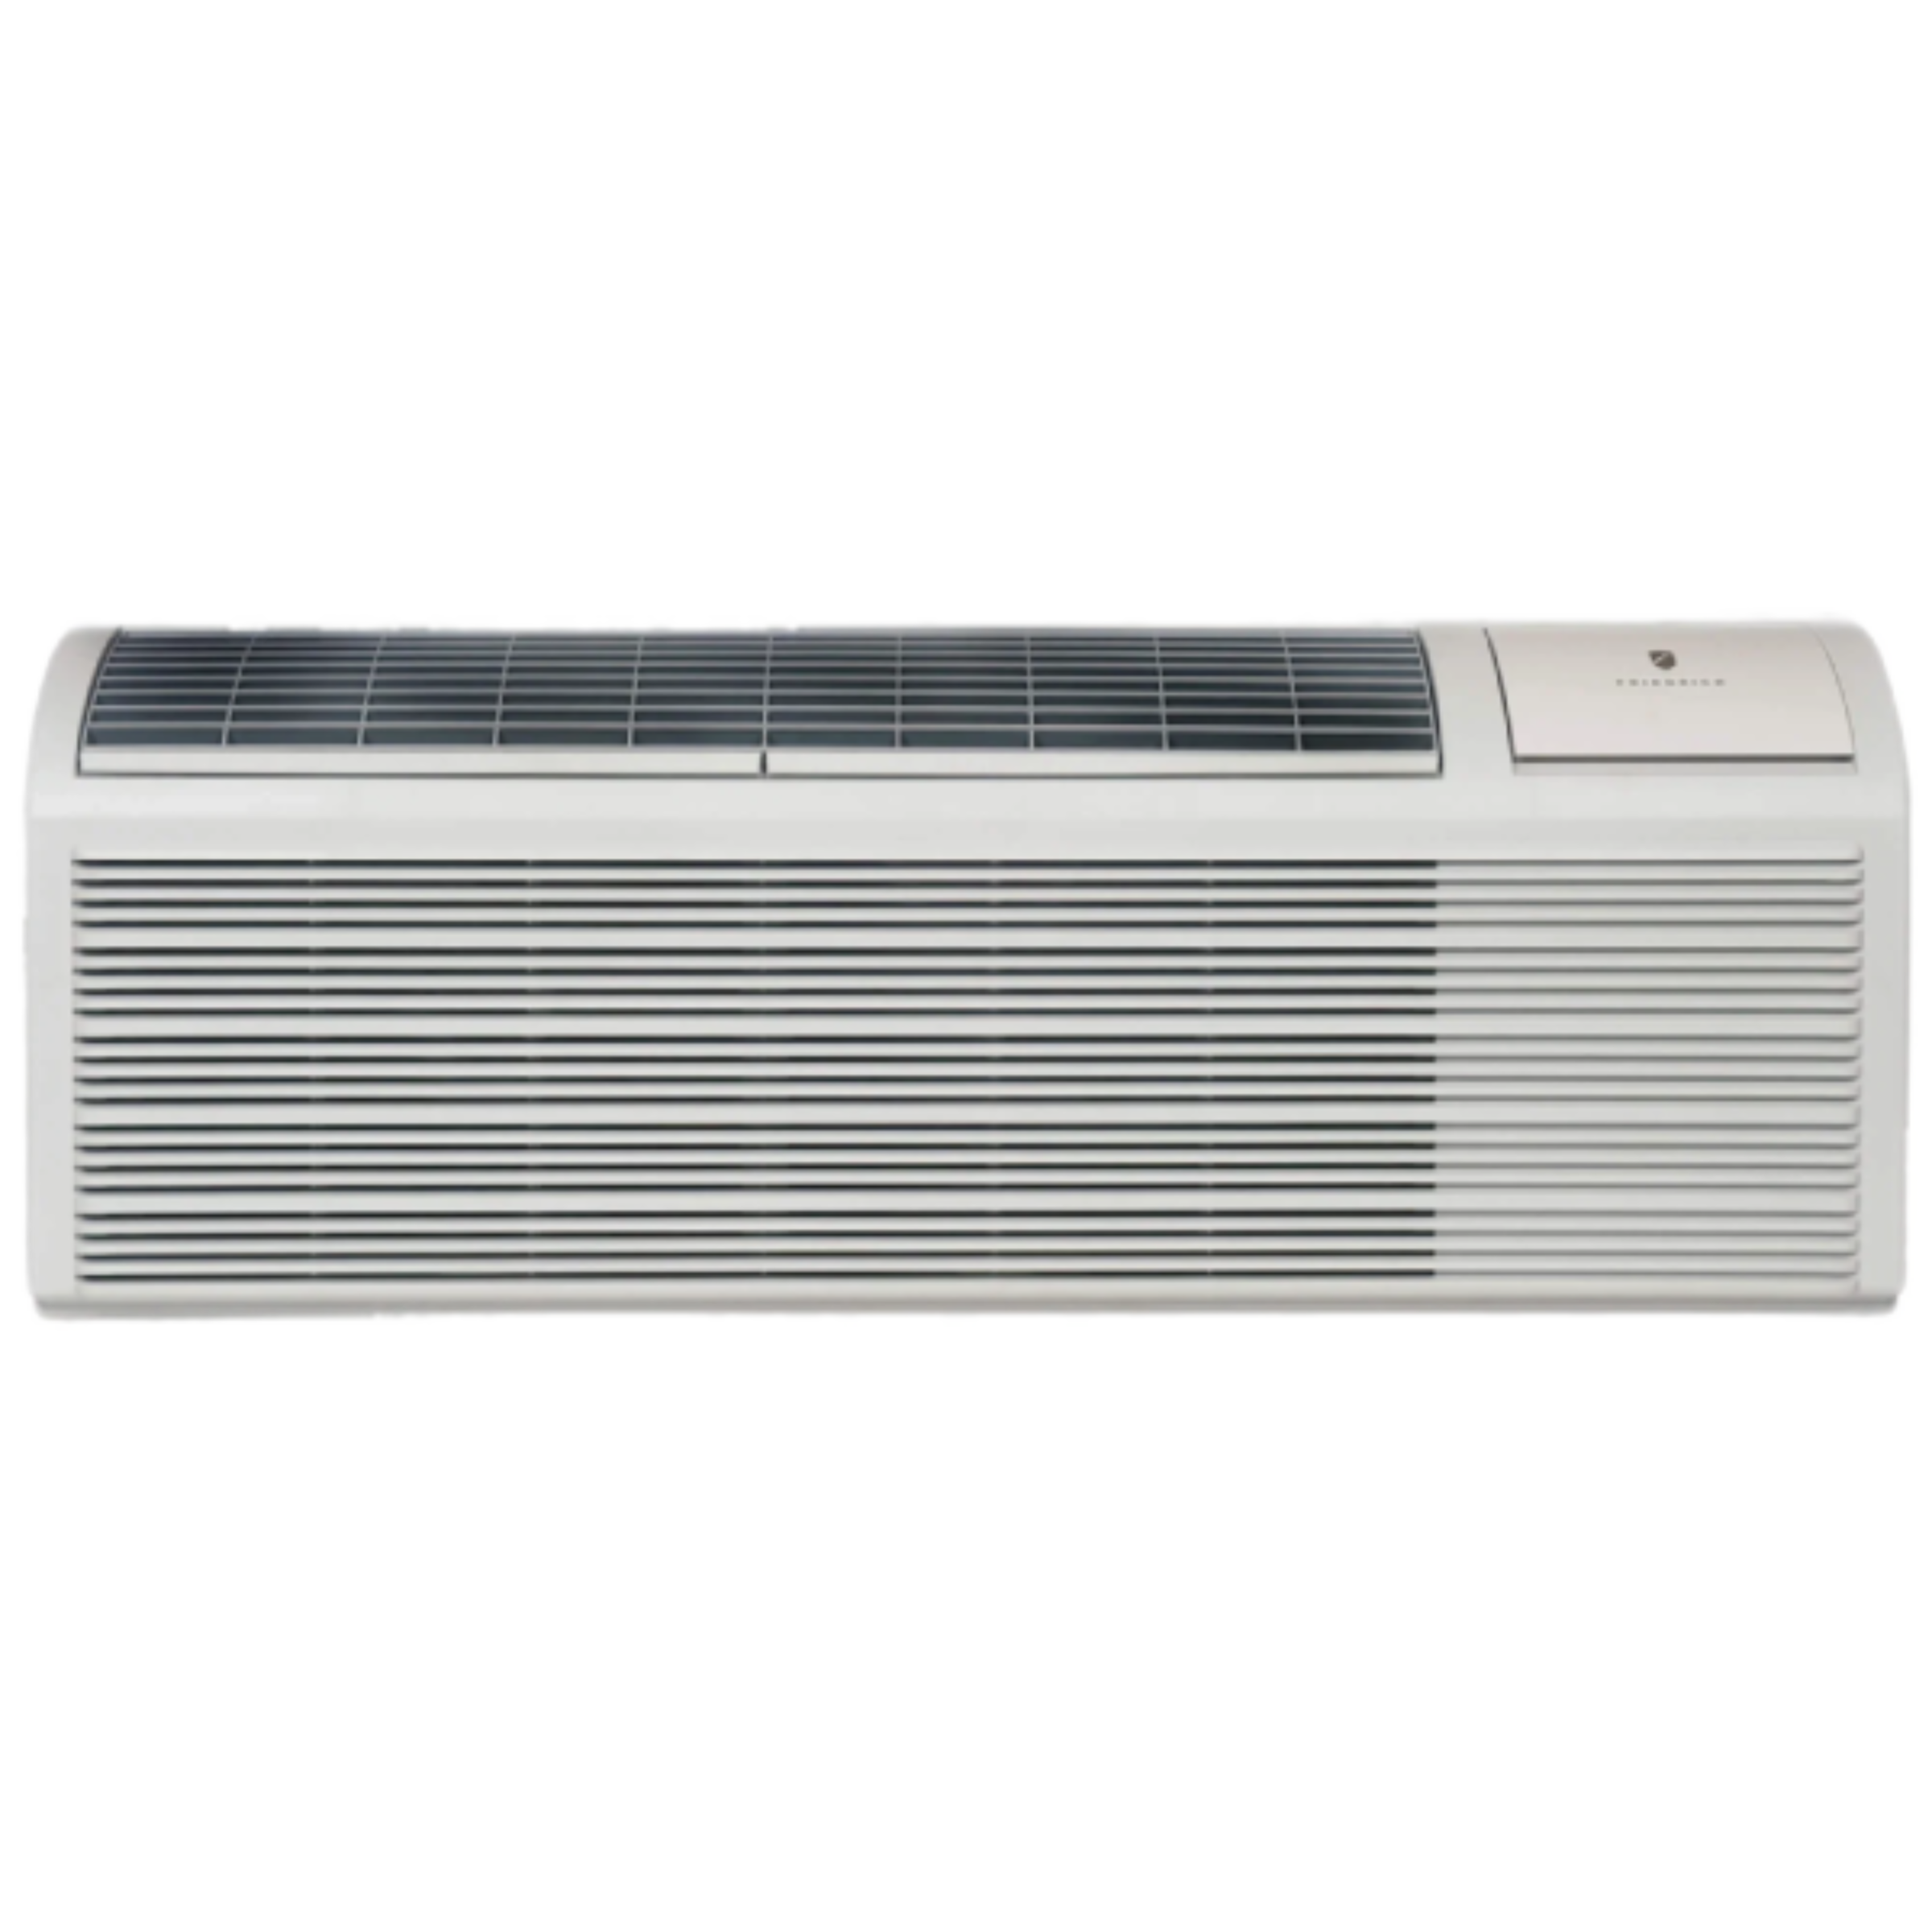 Friedrich ZoneAire Select Packaged Terminal Air Conditioner with Electric Heat Model PZE15K3SB, 10.2 EER, 253 V, 470 CFM, 14500 BTU